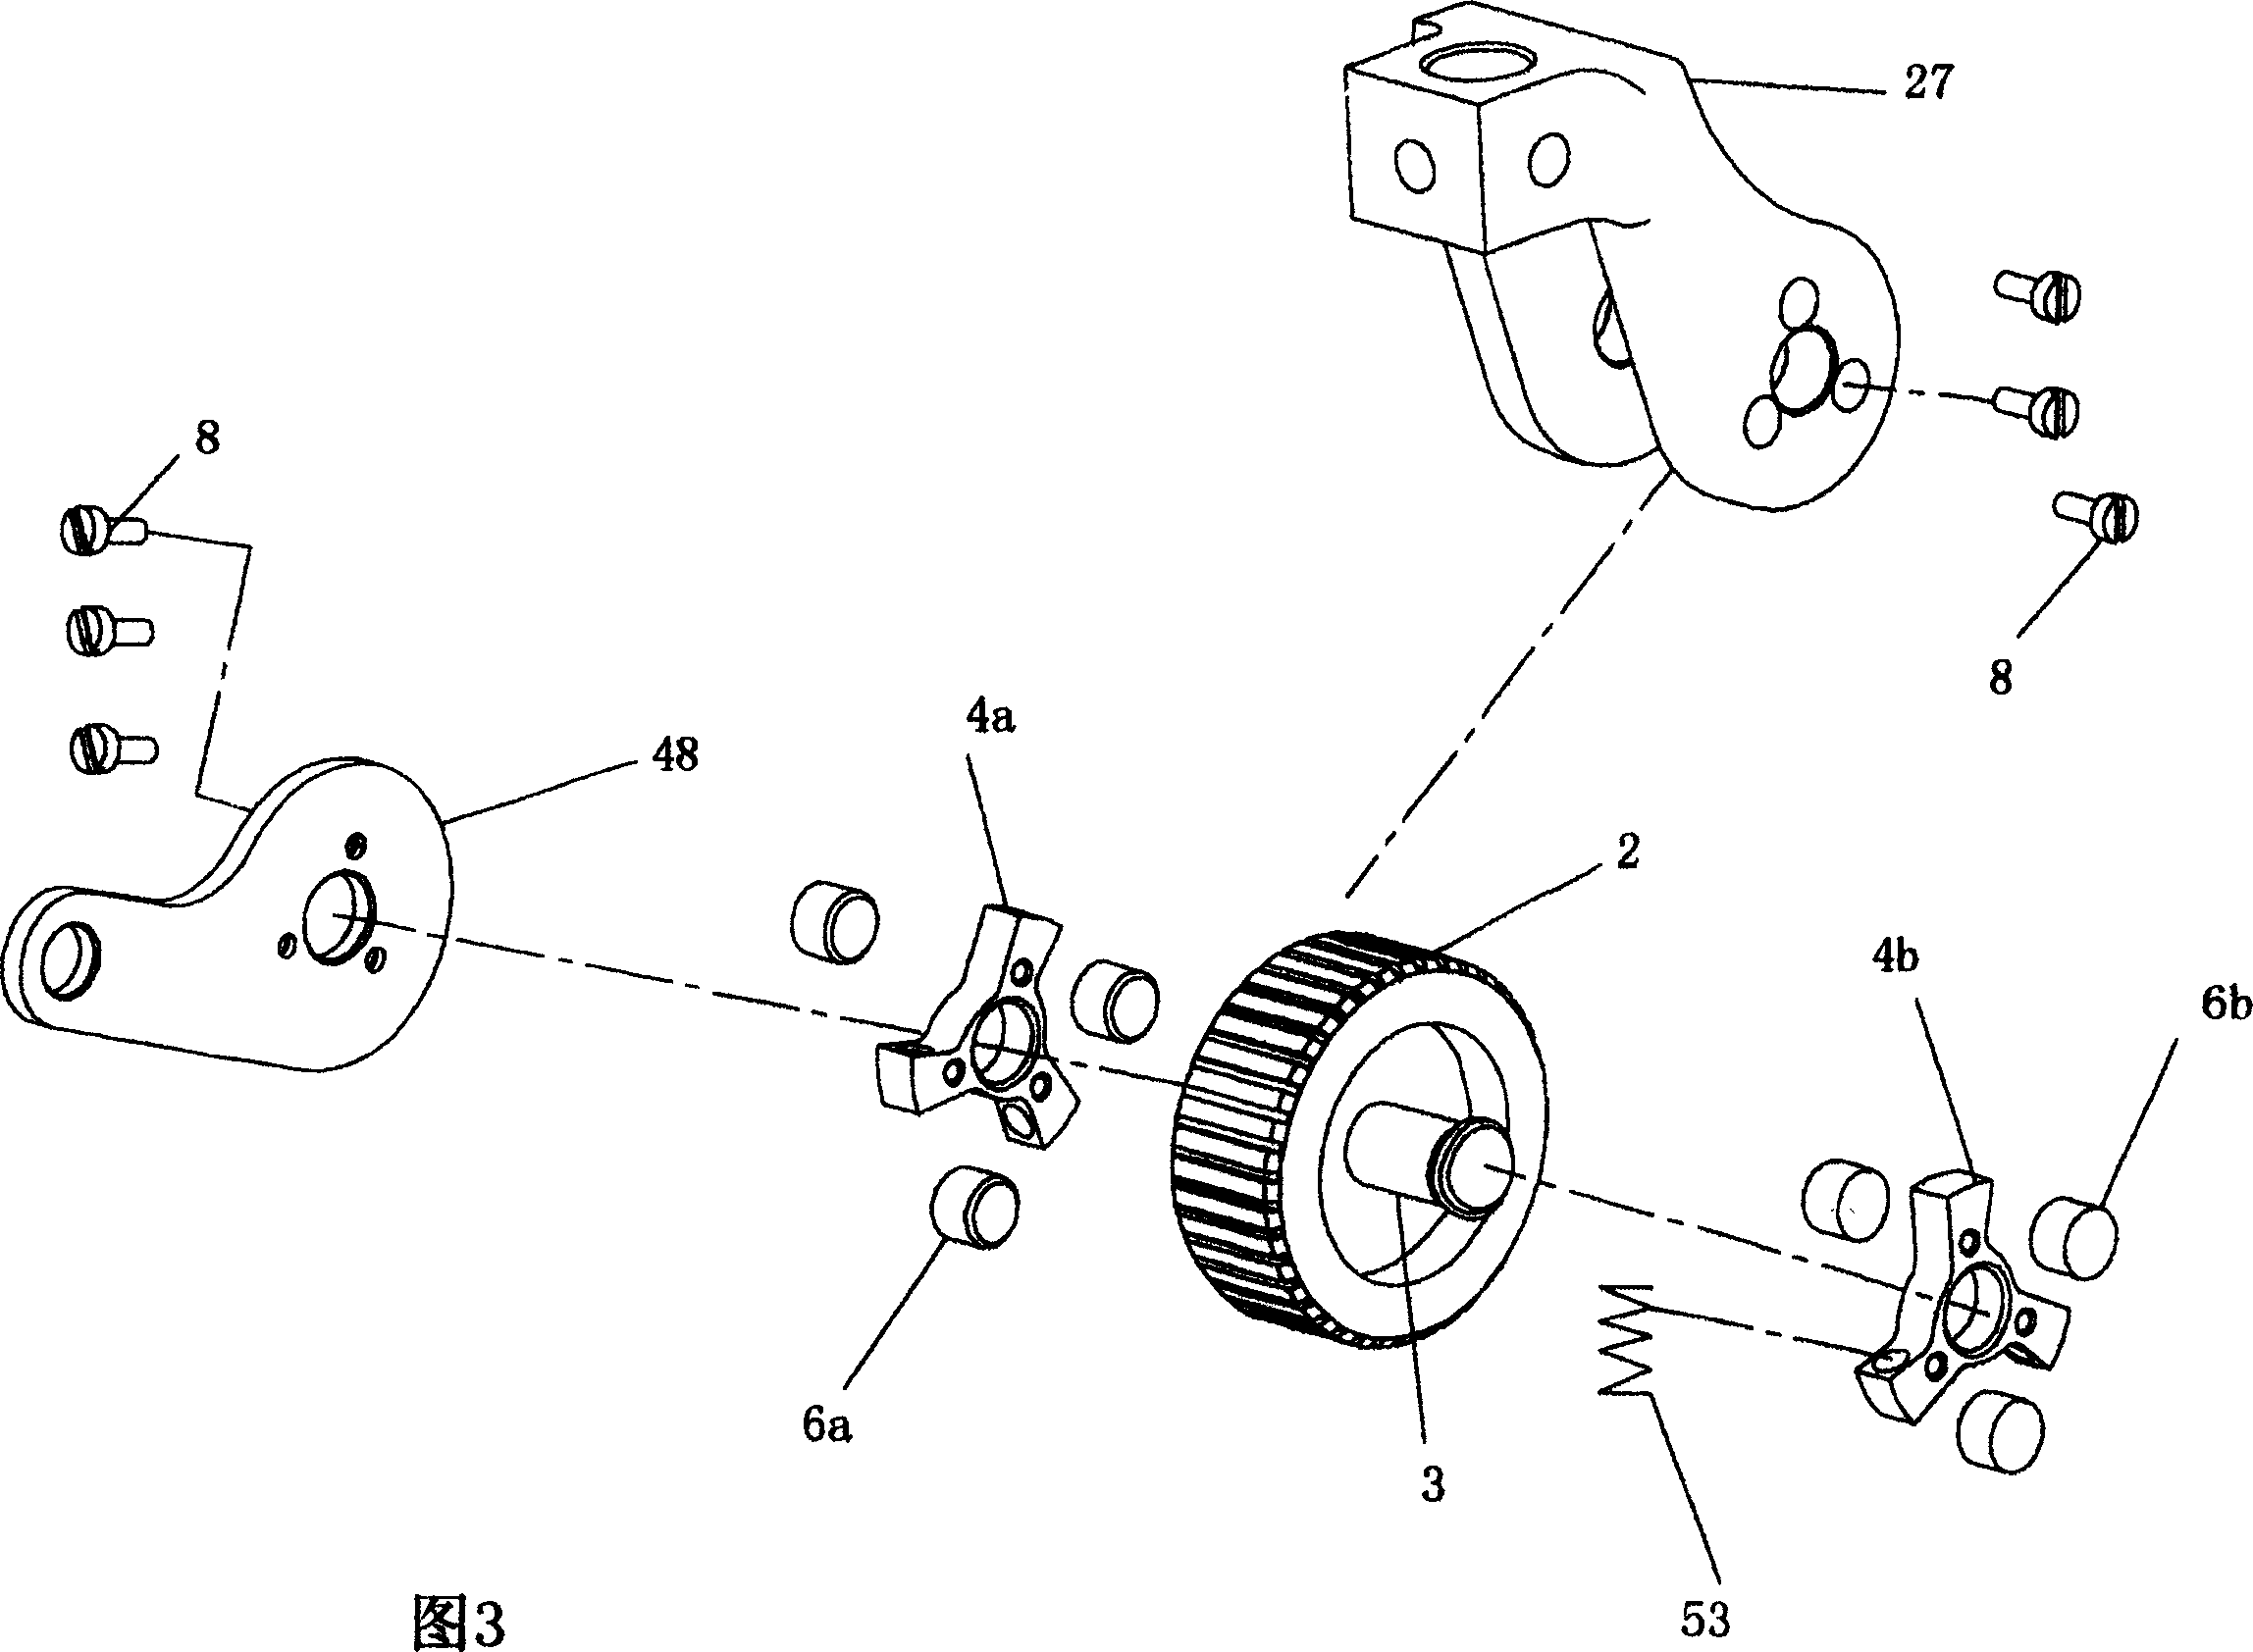 Auxiliary cloth-handling mechanism for sewing machine